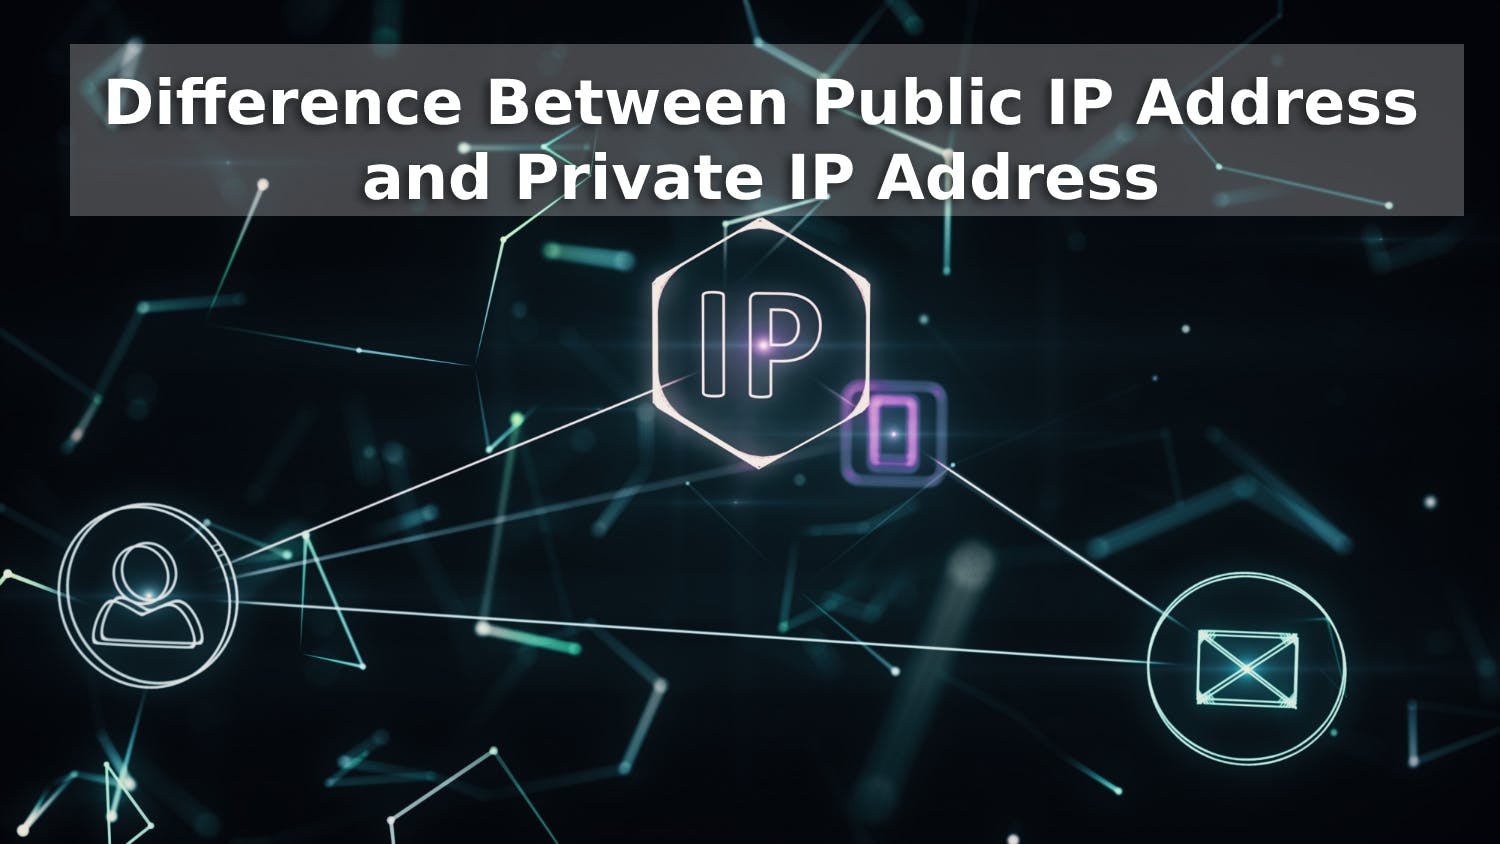 Difference Between Public and Private IP Address